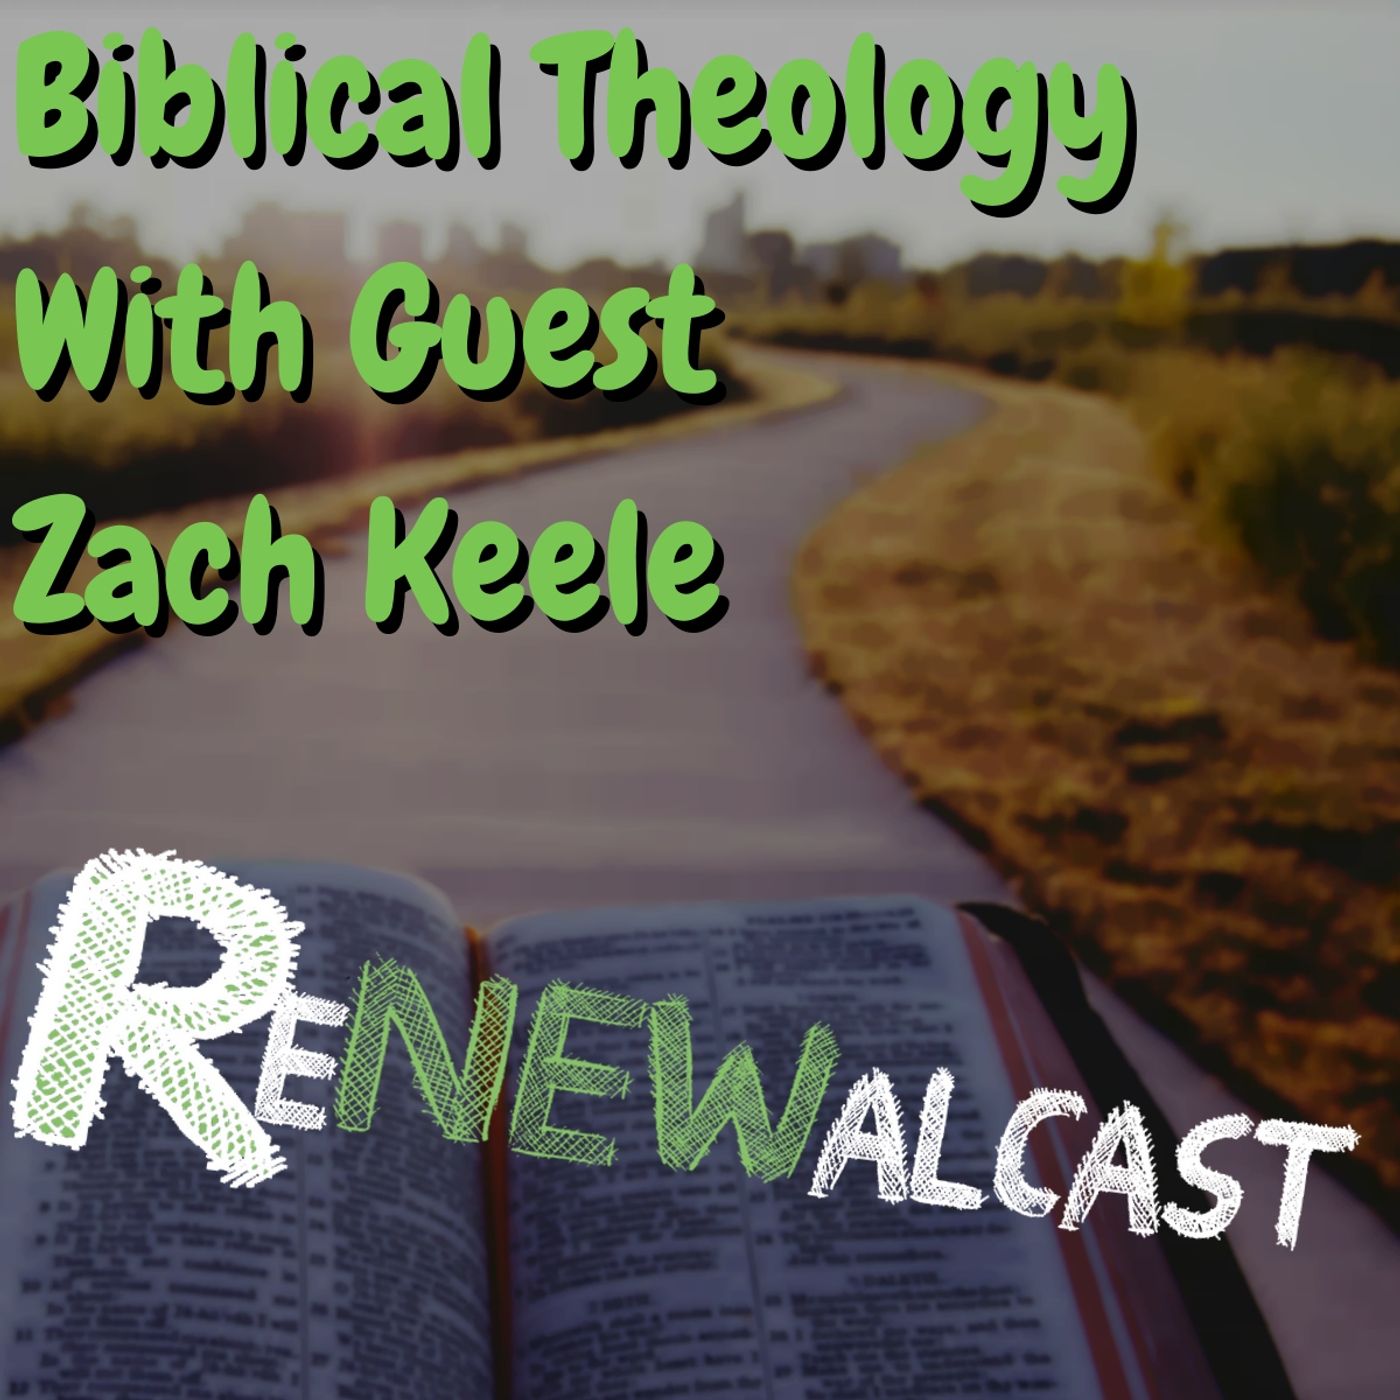 Biblical Theology with Guest Zach Keele